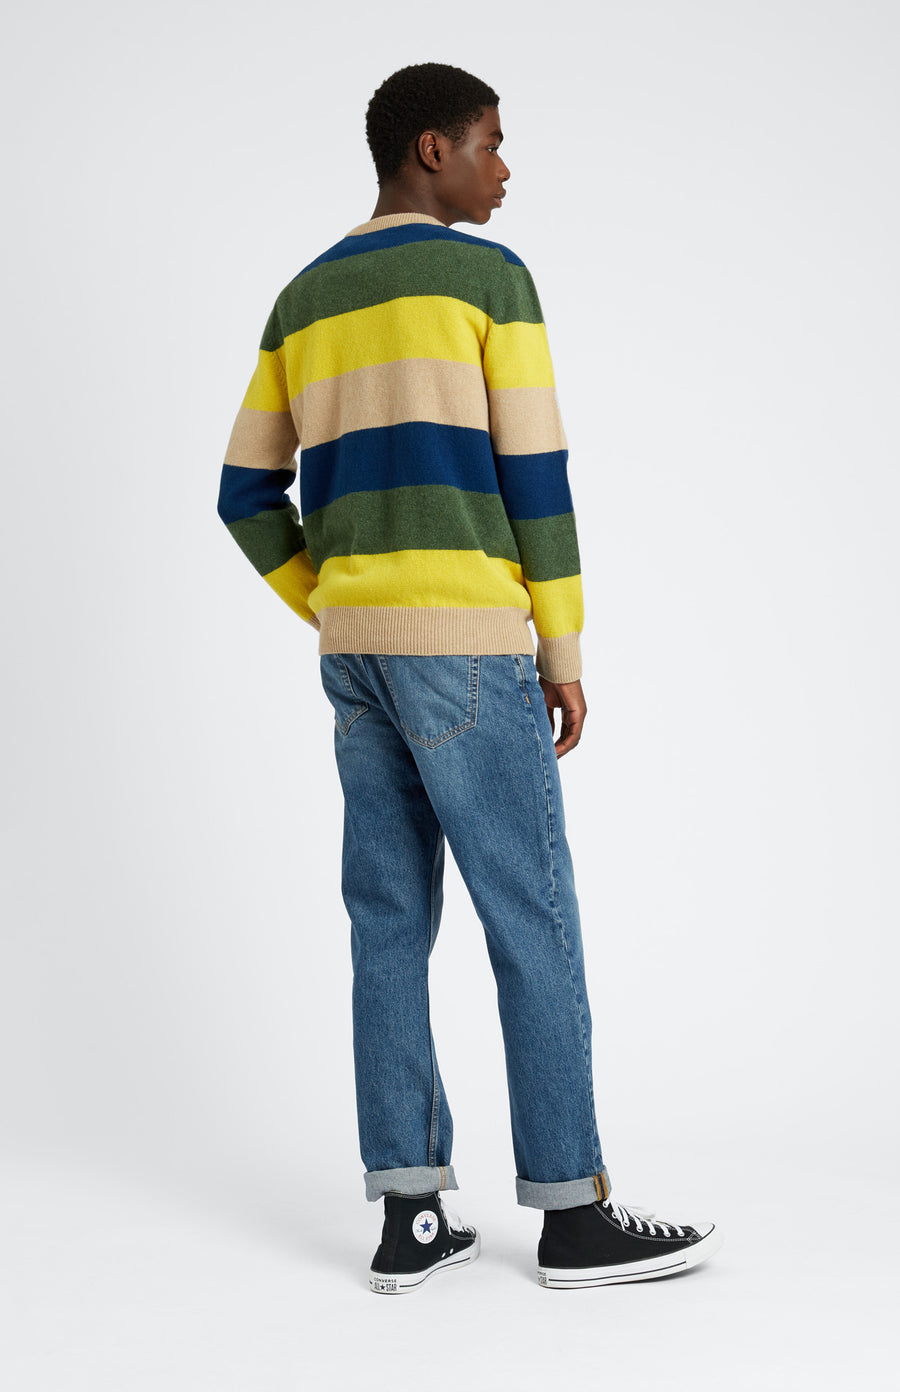 Pringle of Scotland Men's Round Neck Lambswool Jumper in Yellow / Sand Stripe rear view